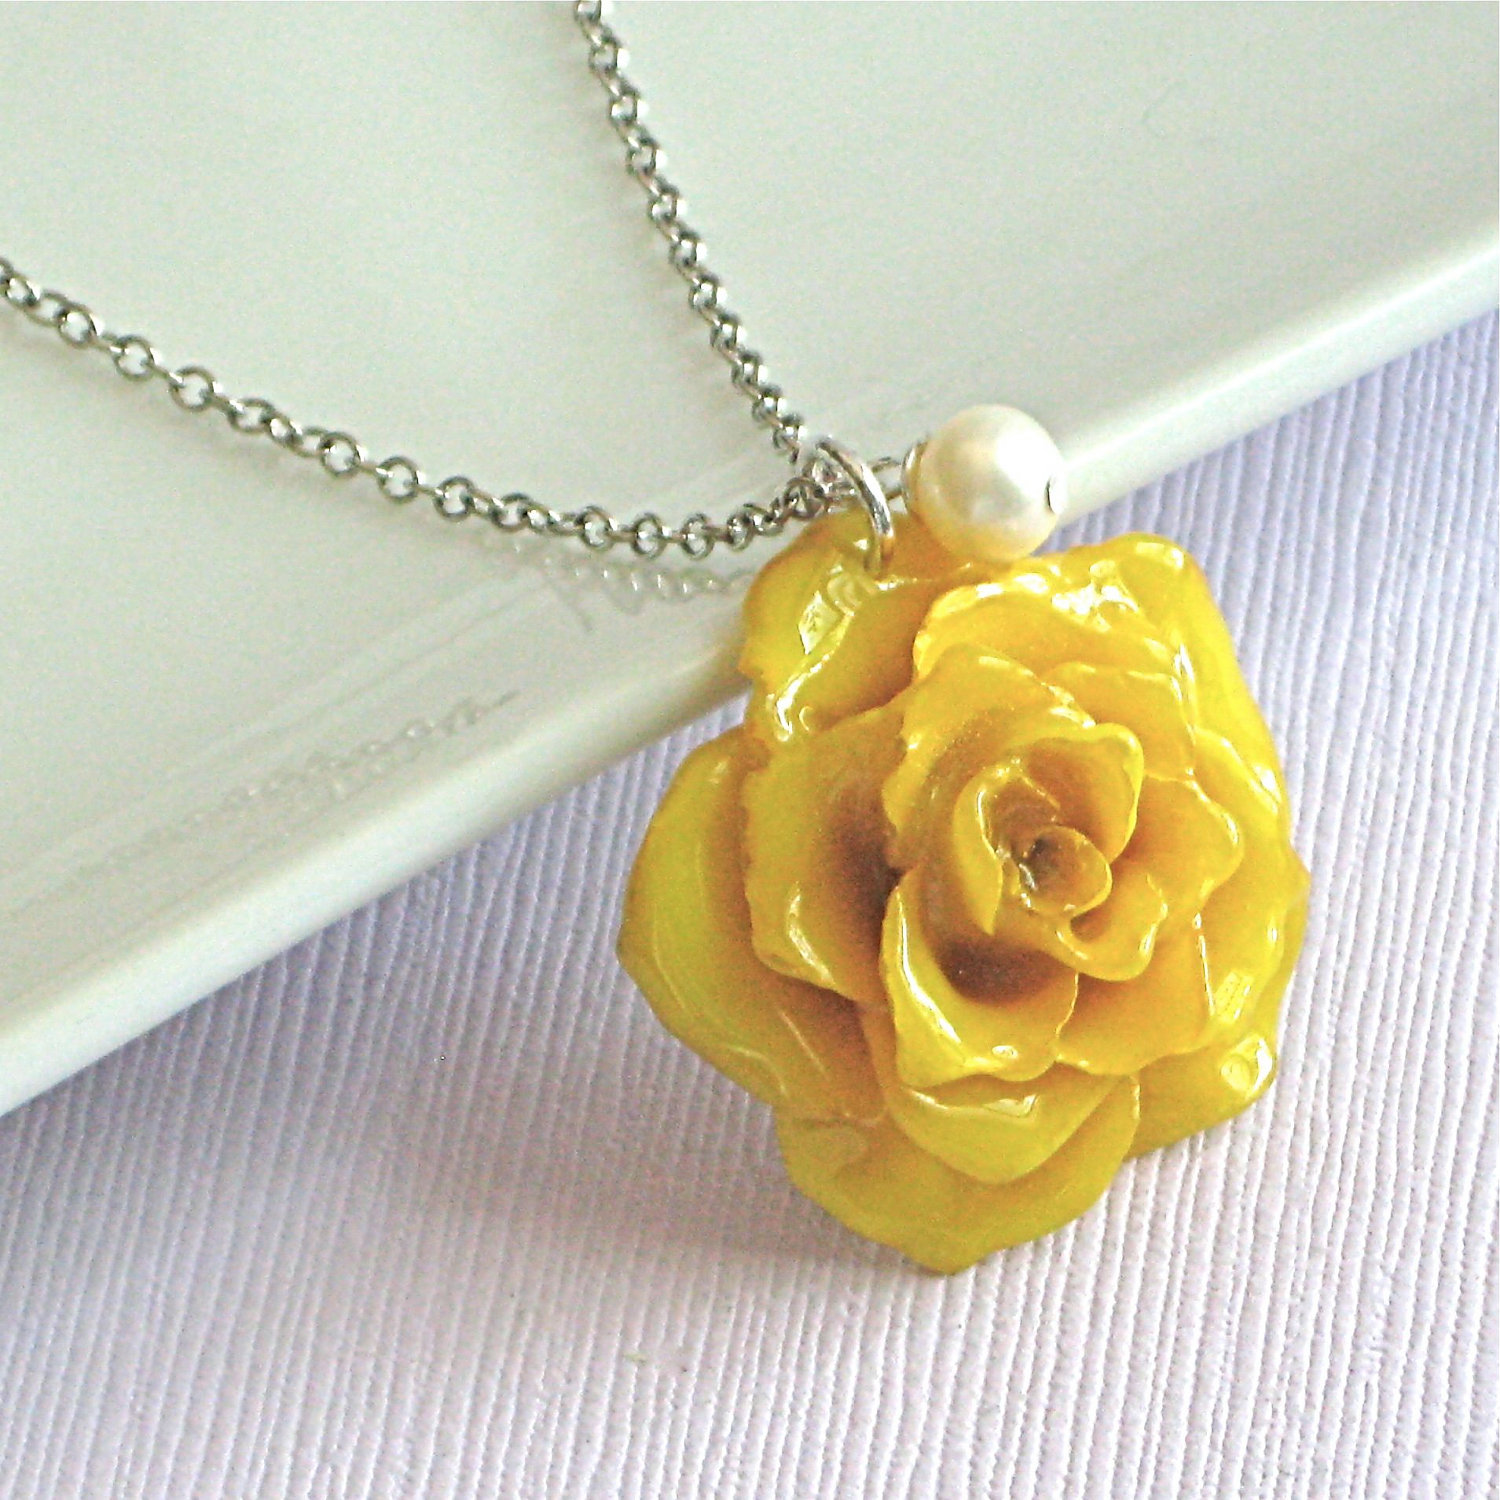 Real Yellow Rose Necklace Sterling Silver Natural Preserved